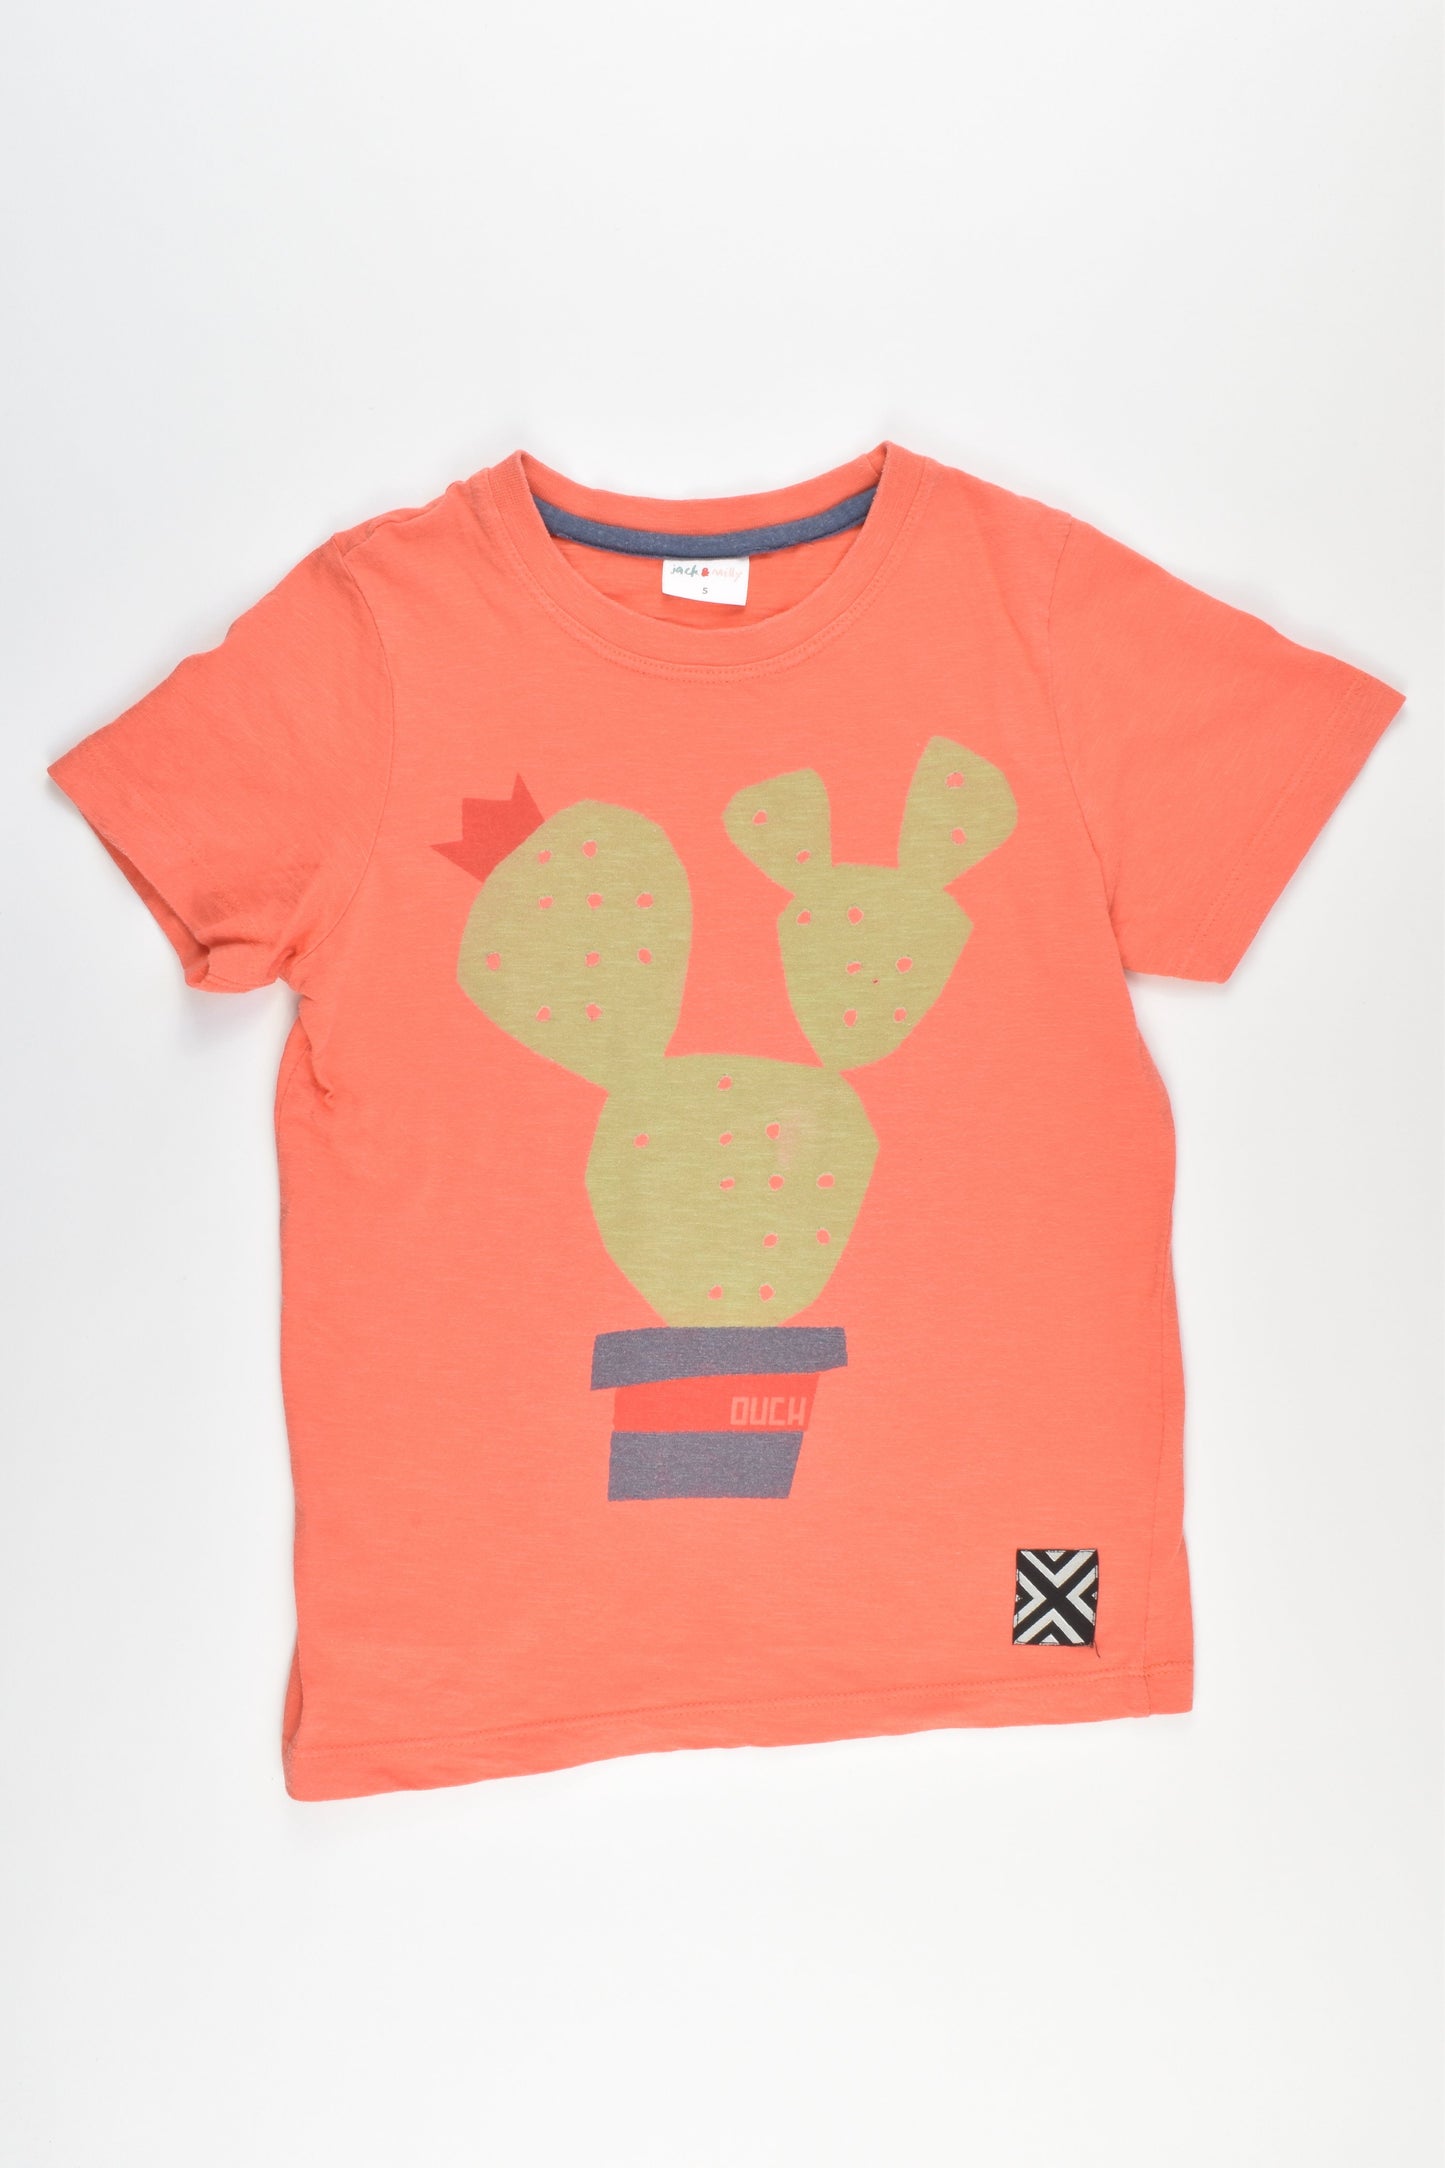 Jack & Milly Size 5 T-shirt